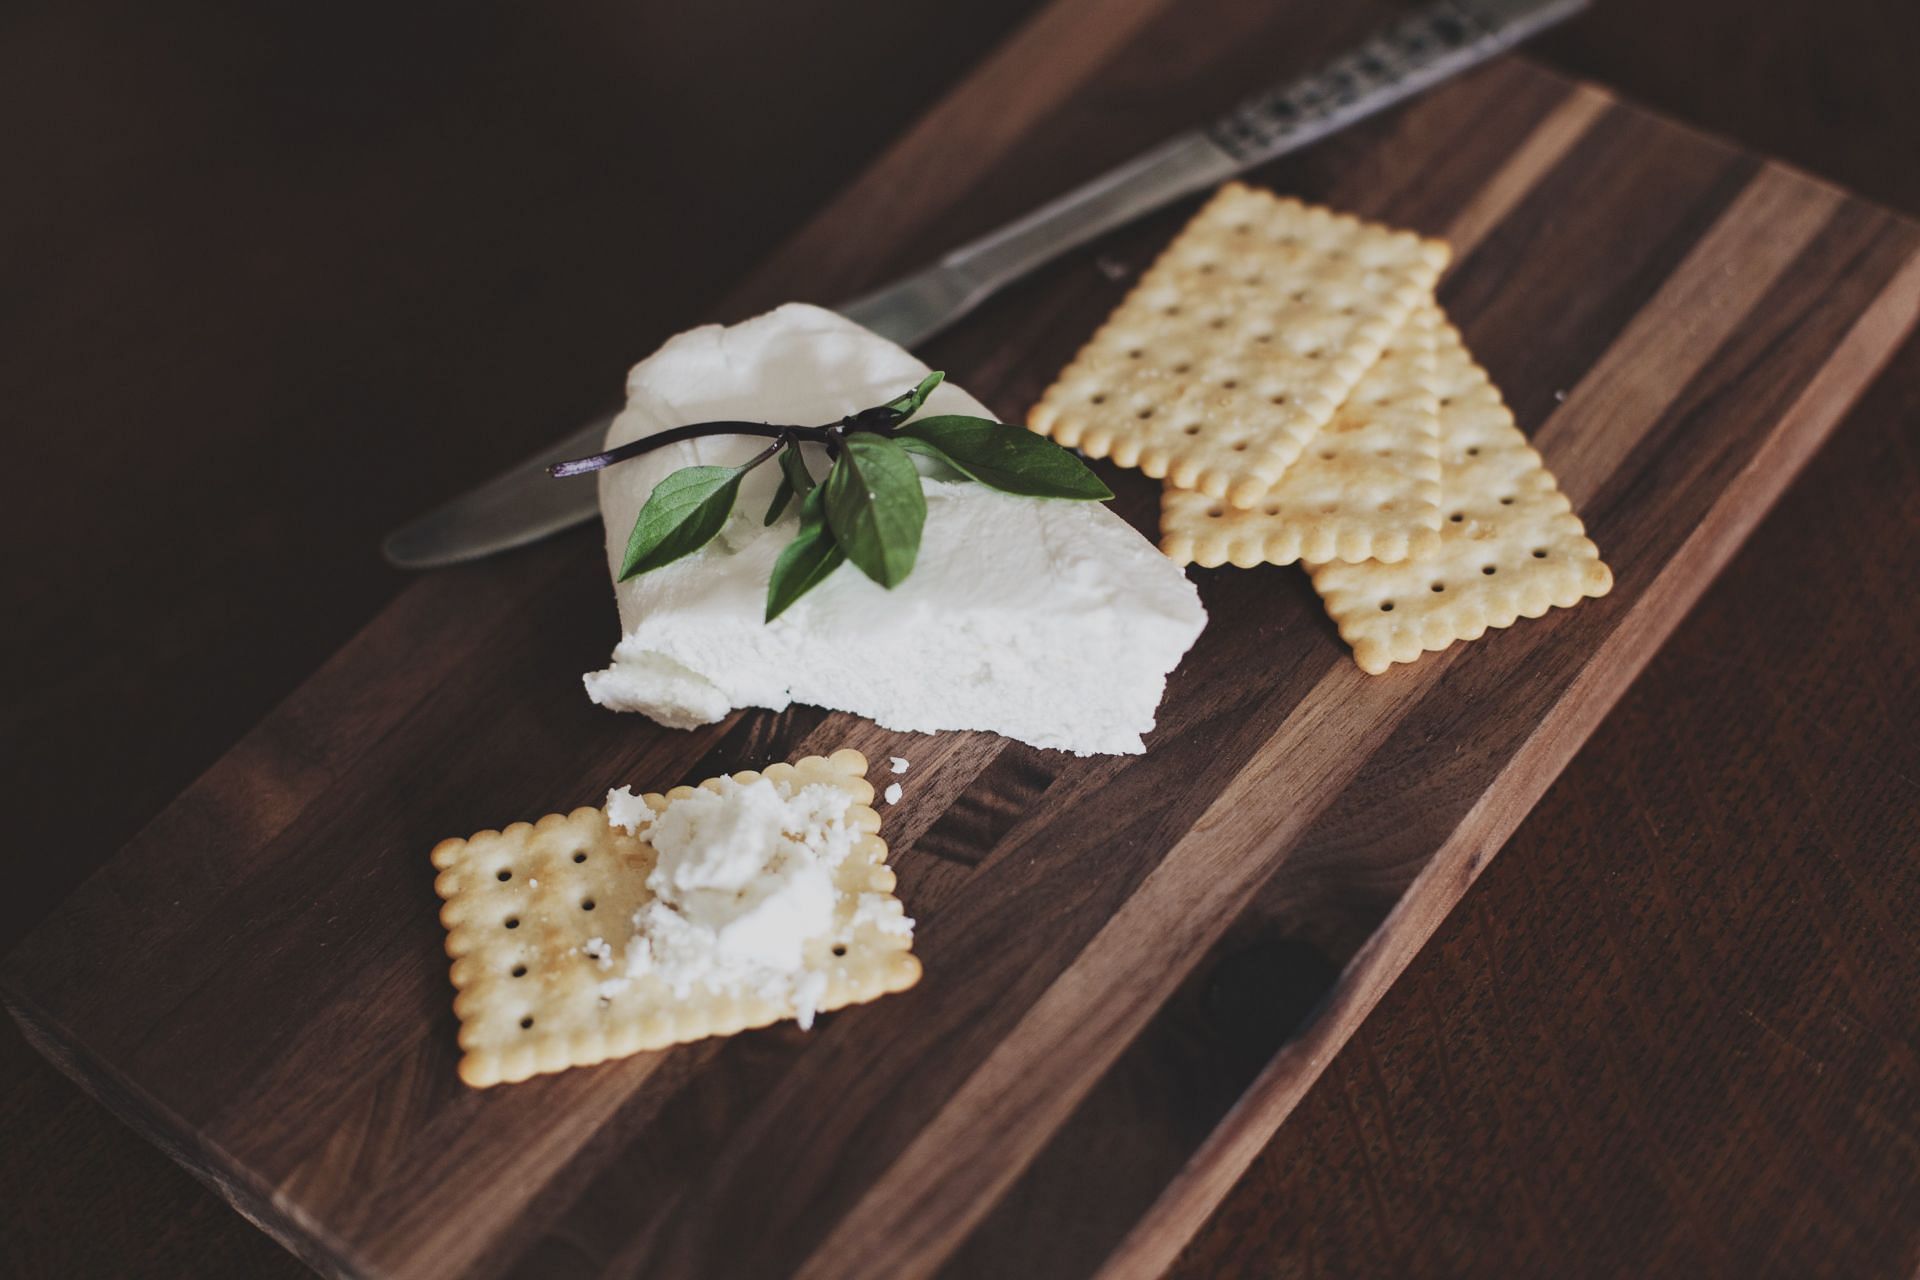 Cream cheese with crackers is a popular delicacy. (Image via Unsplash/Anita Peeples)